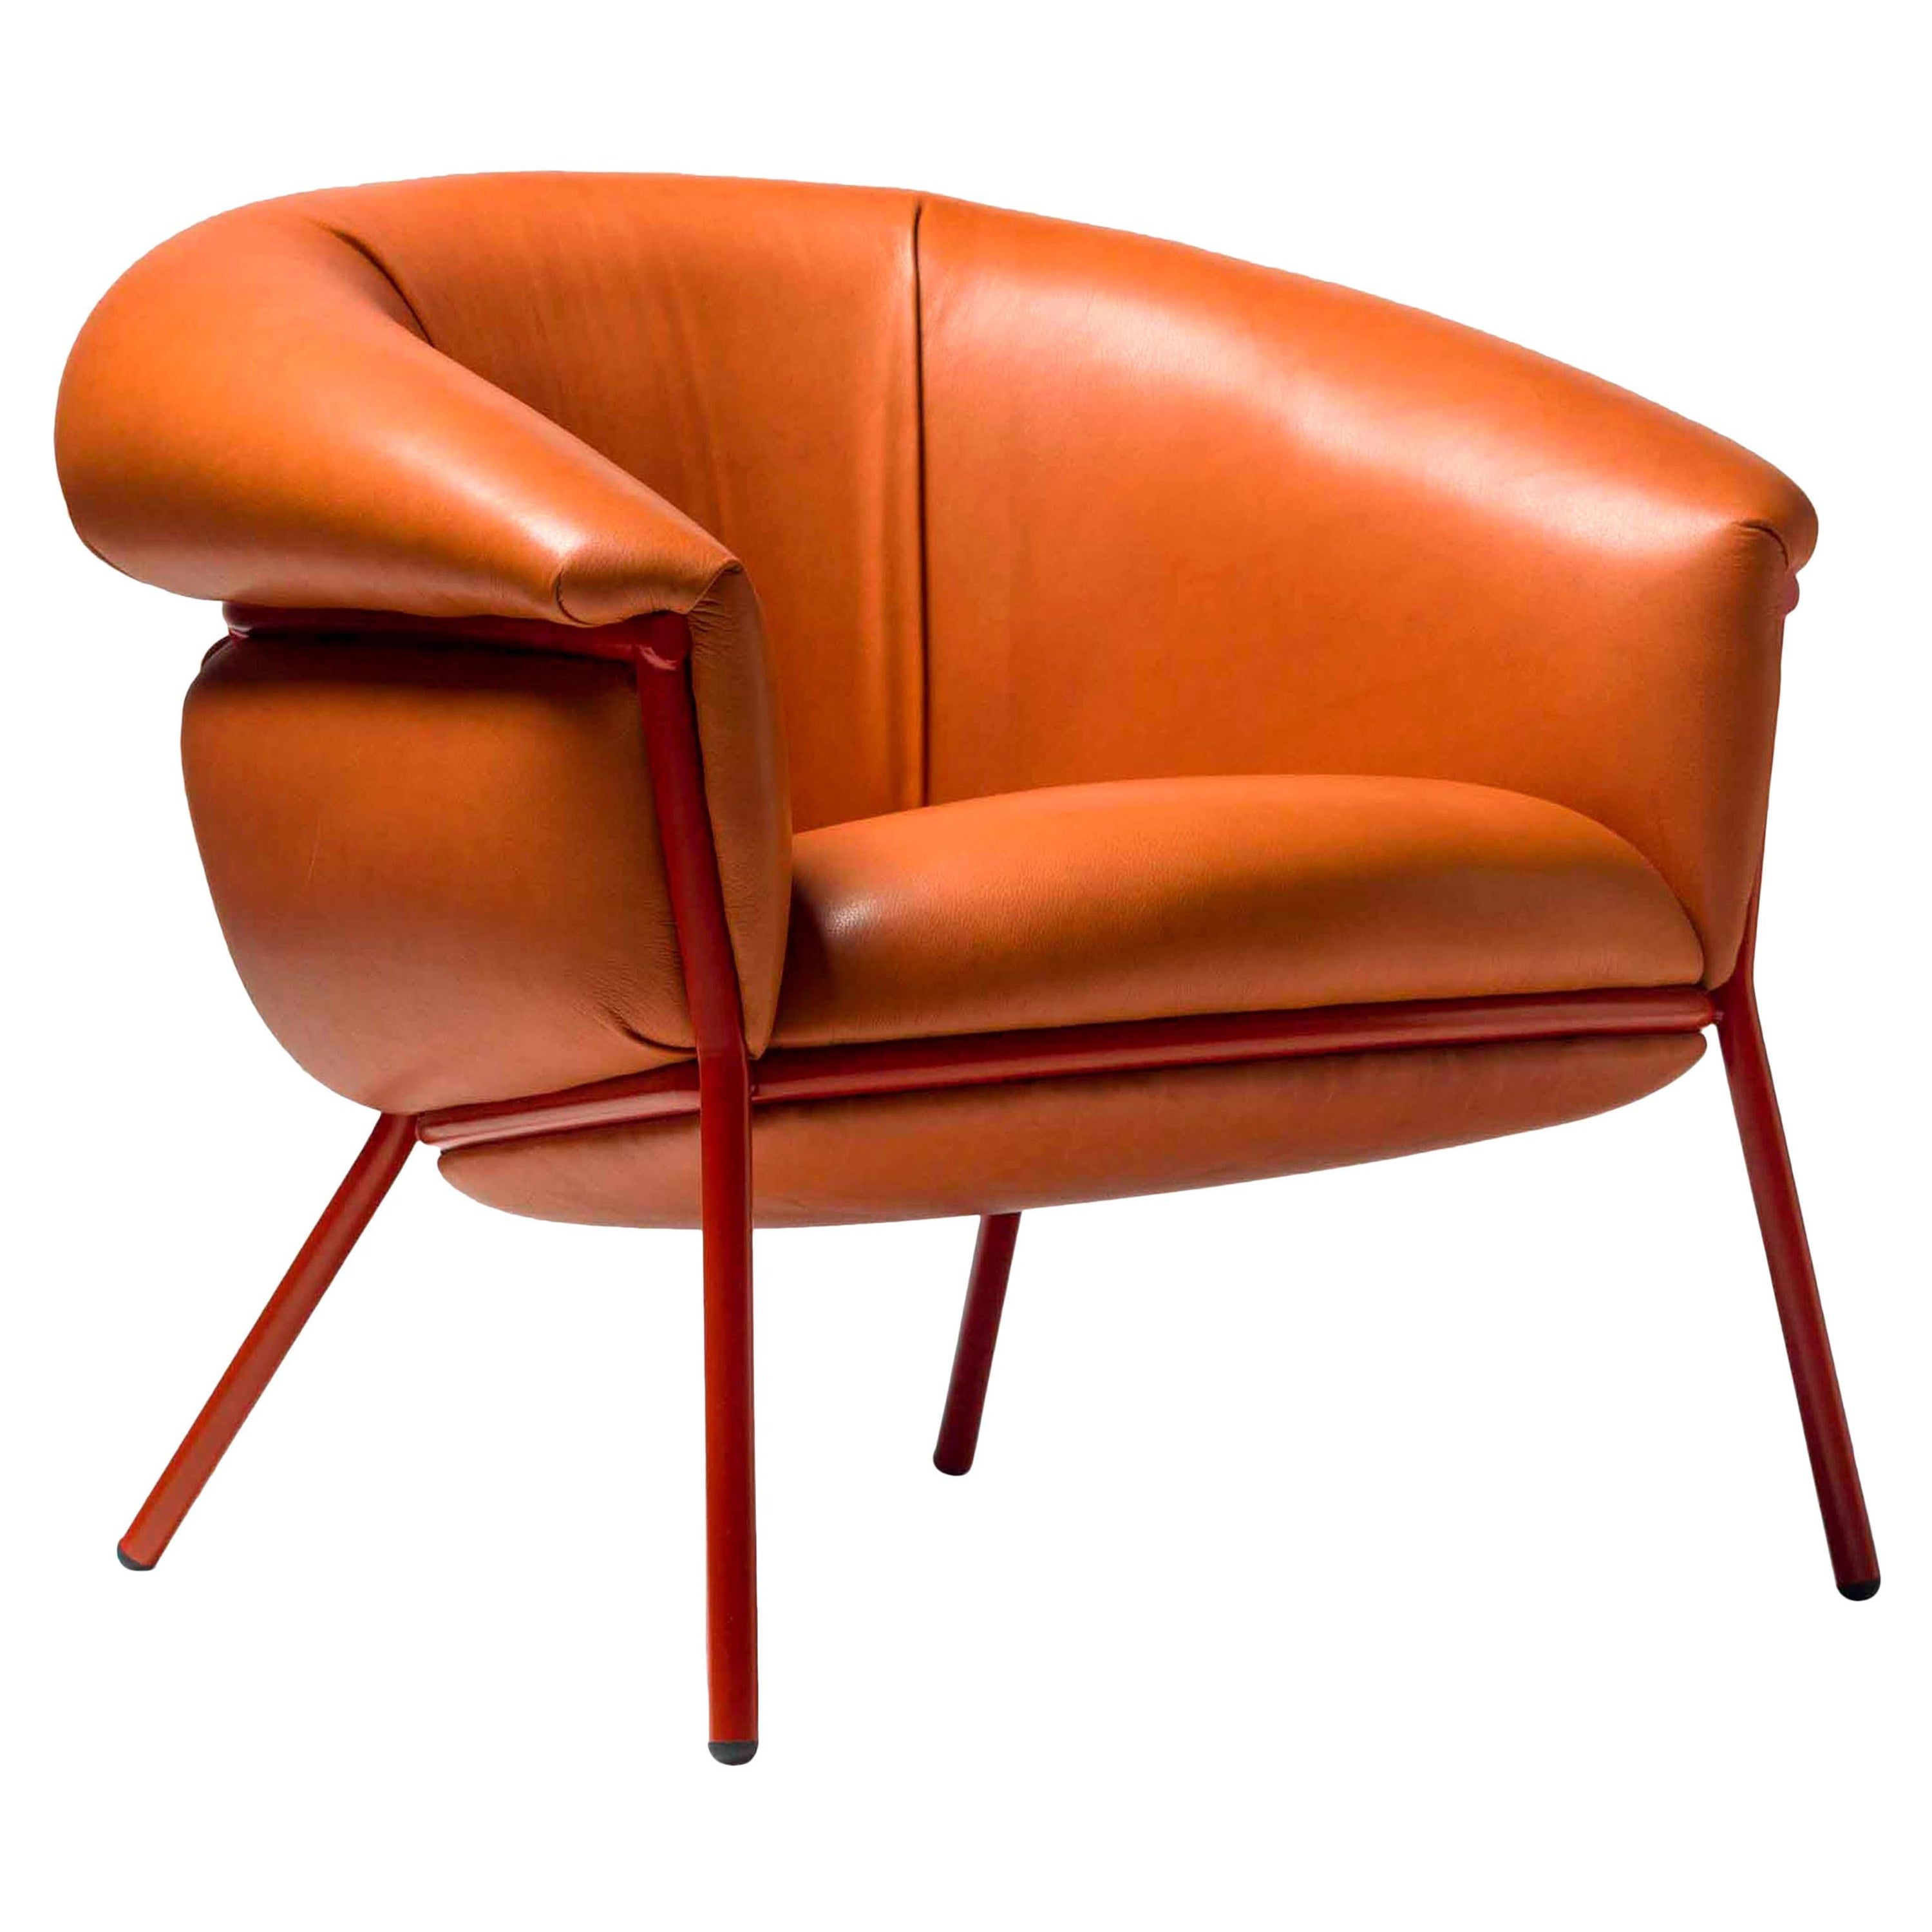 Grasso Armchair by Stephen Burks, Orange for BD For Sale